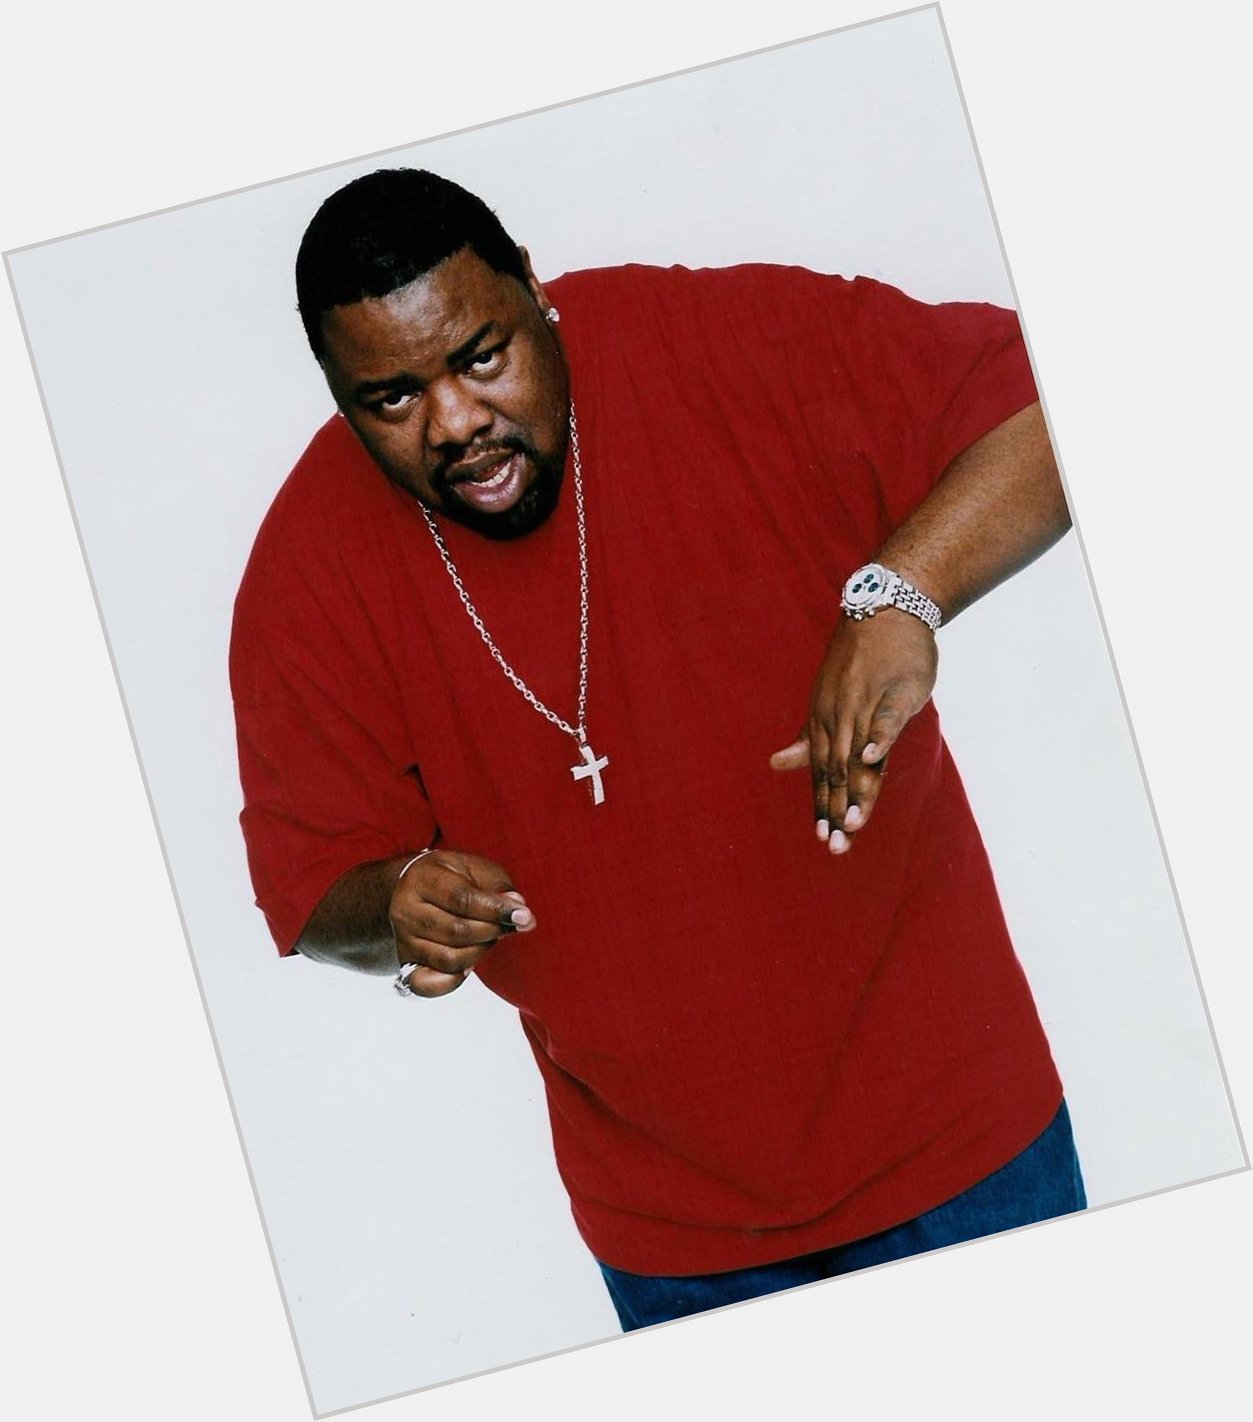 Happy Heavenly Birthday, Biz Markie. He would ve turned 59 today. Rest up.

April 8, 1964 July 16, 2021  